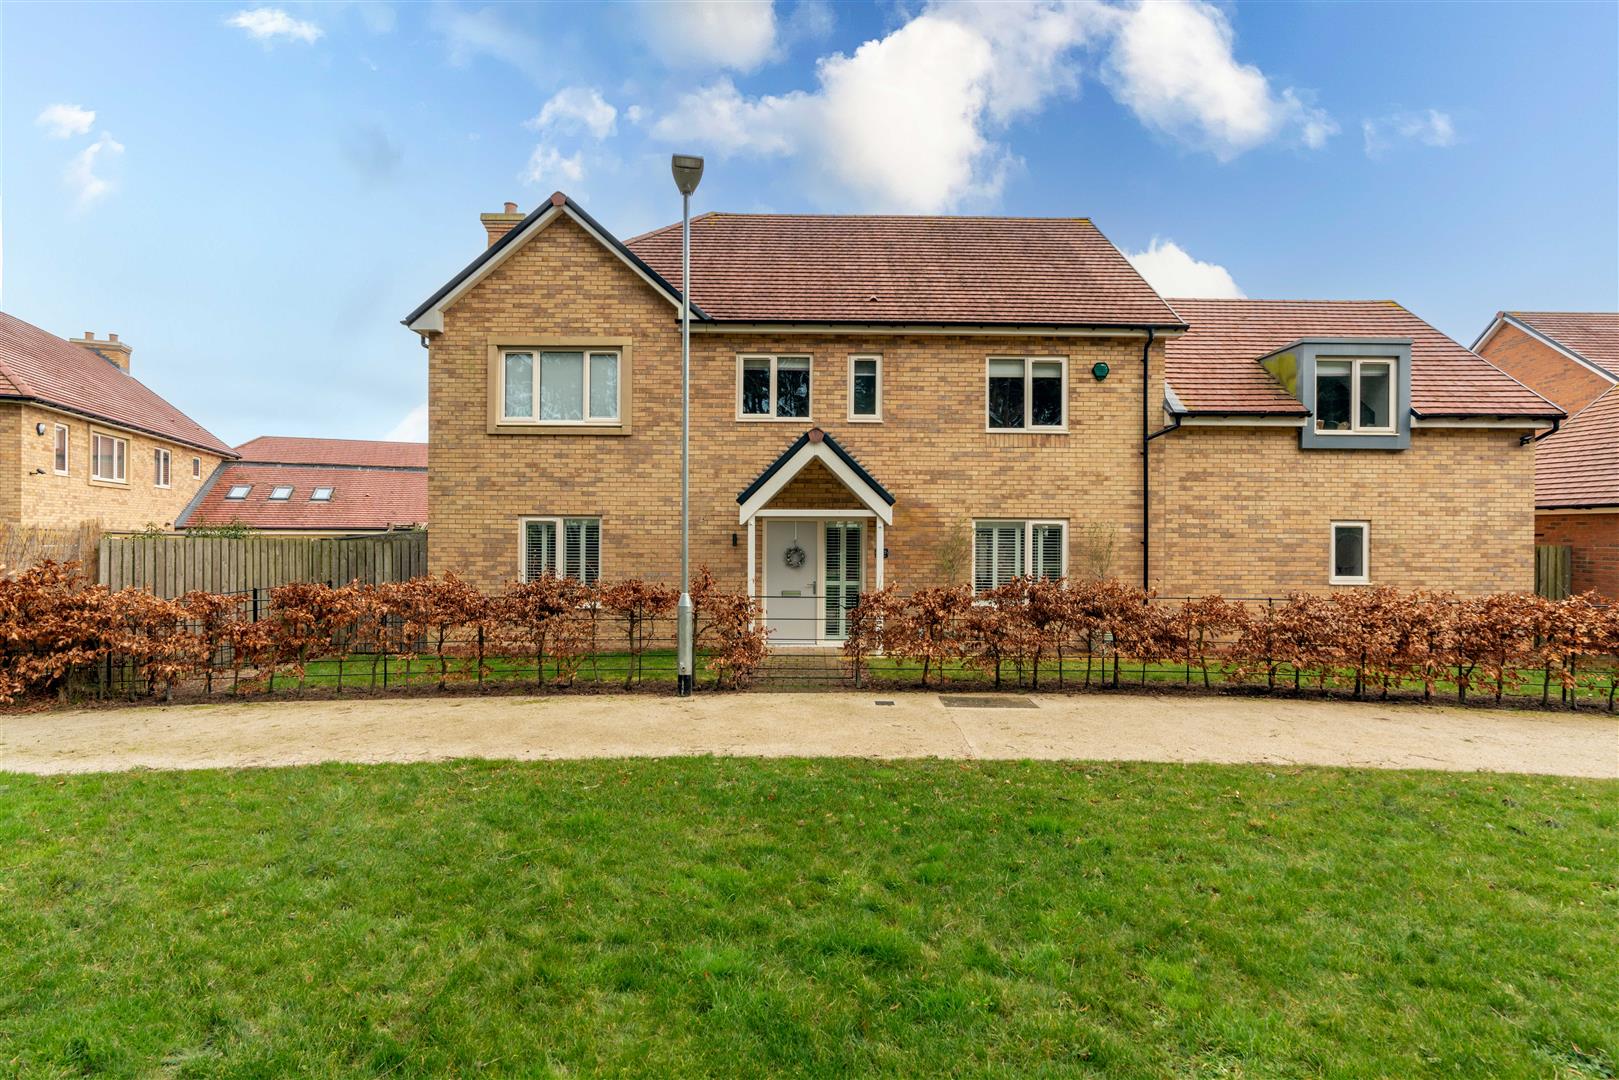 5 bed detached house for sale in Bowmont Walk, Stannington - Property Image 1